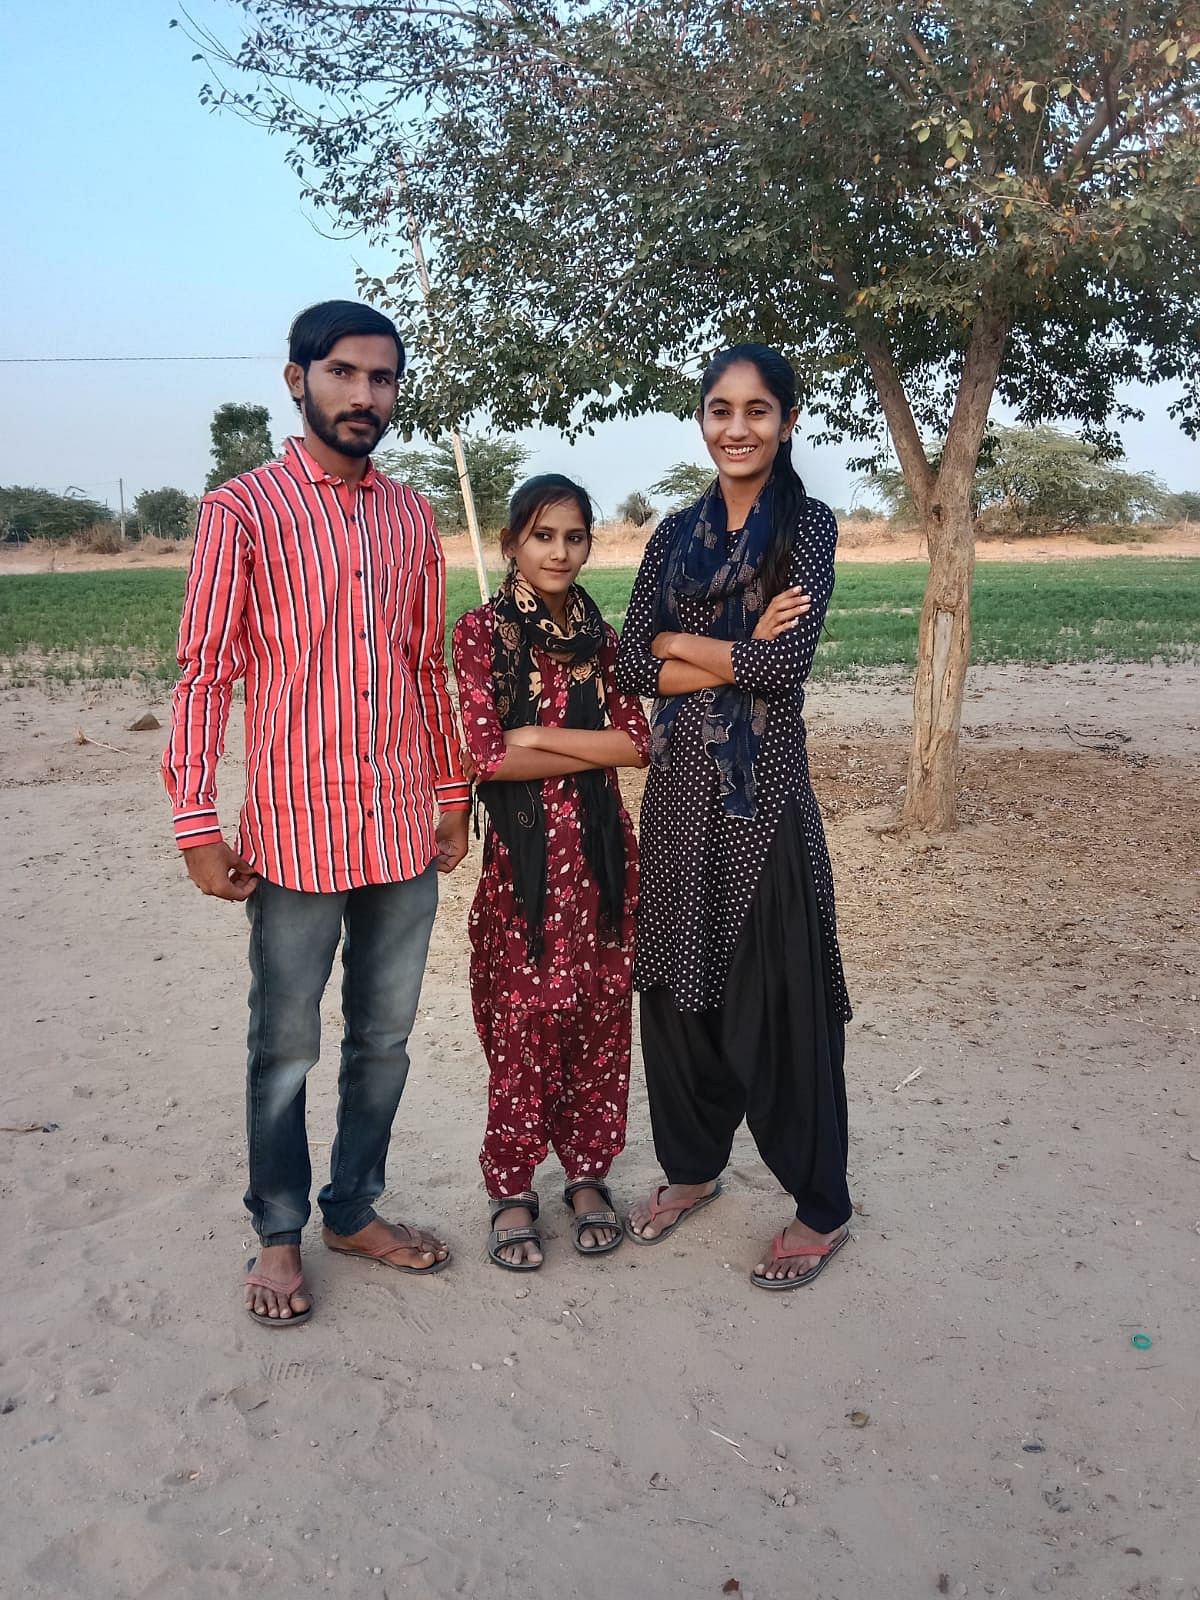 Anisha Bano (right) with cousin Mumal Mehar and their coach Roshan Khan | By special arrangement